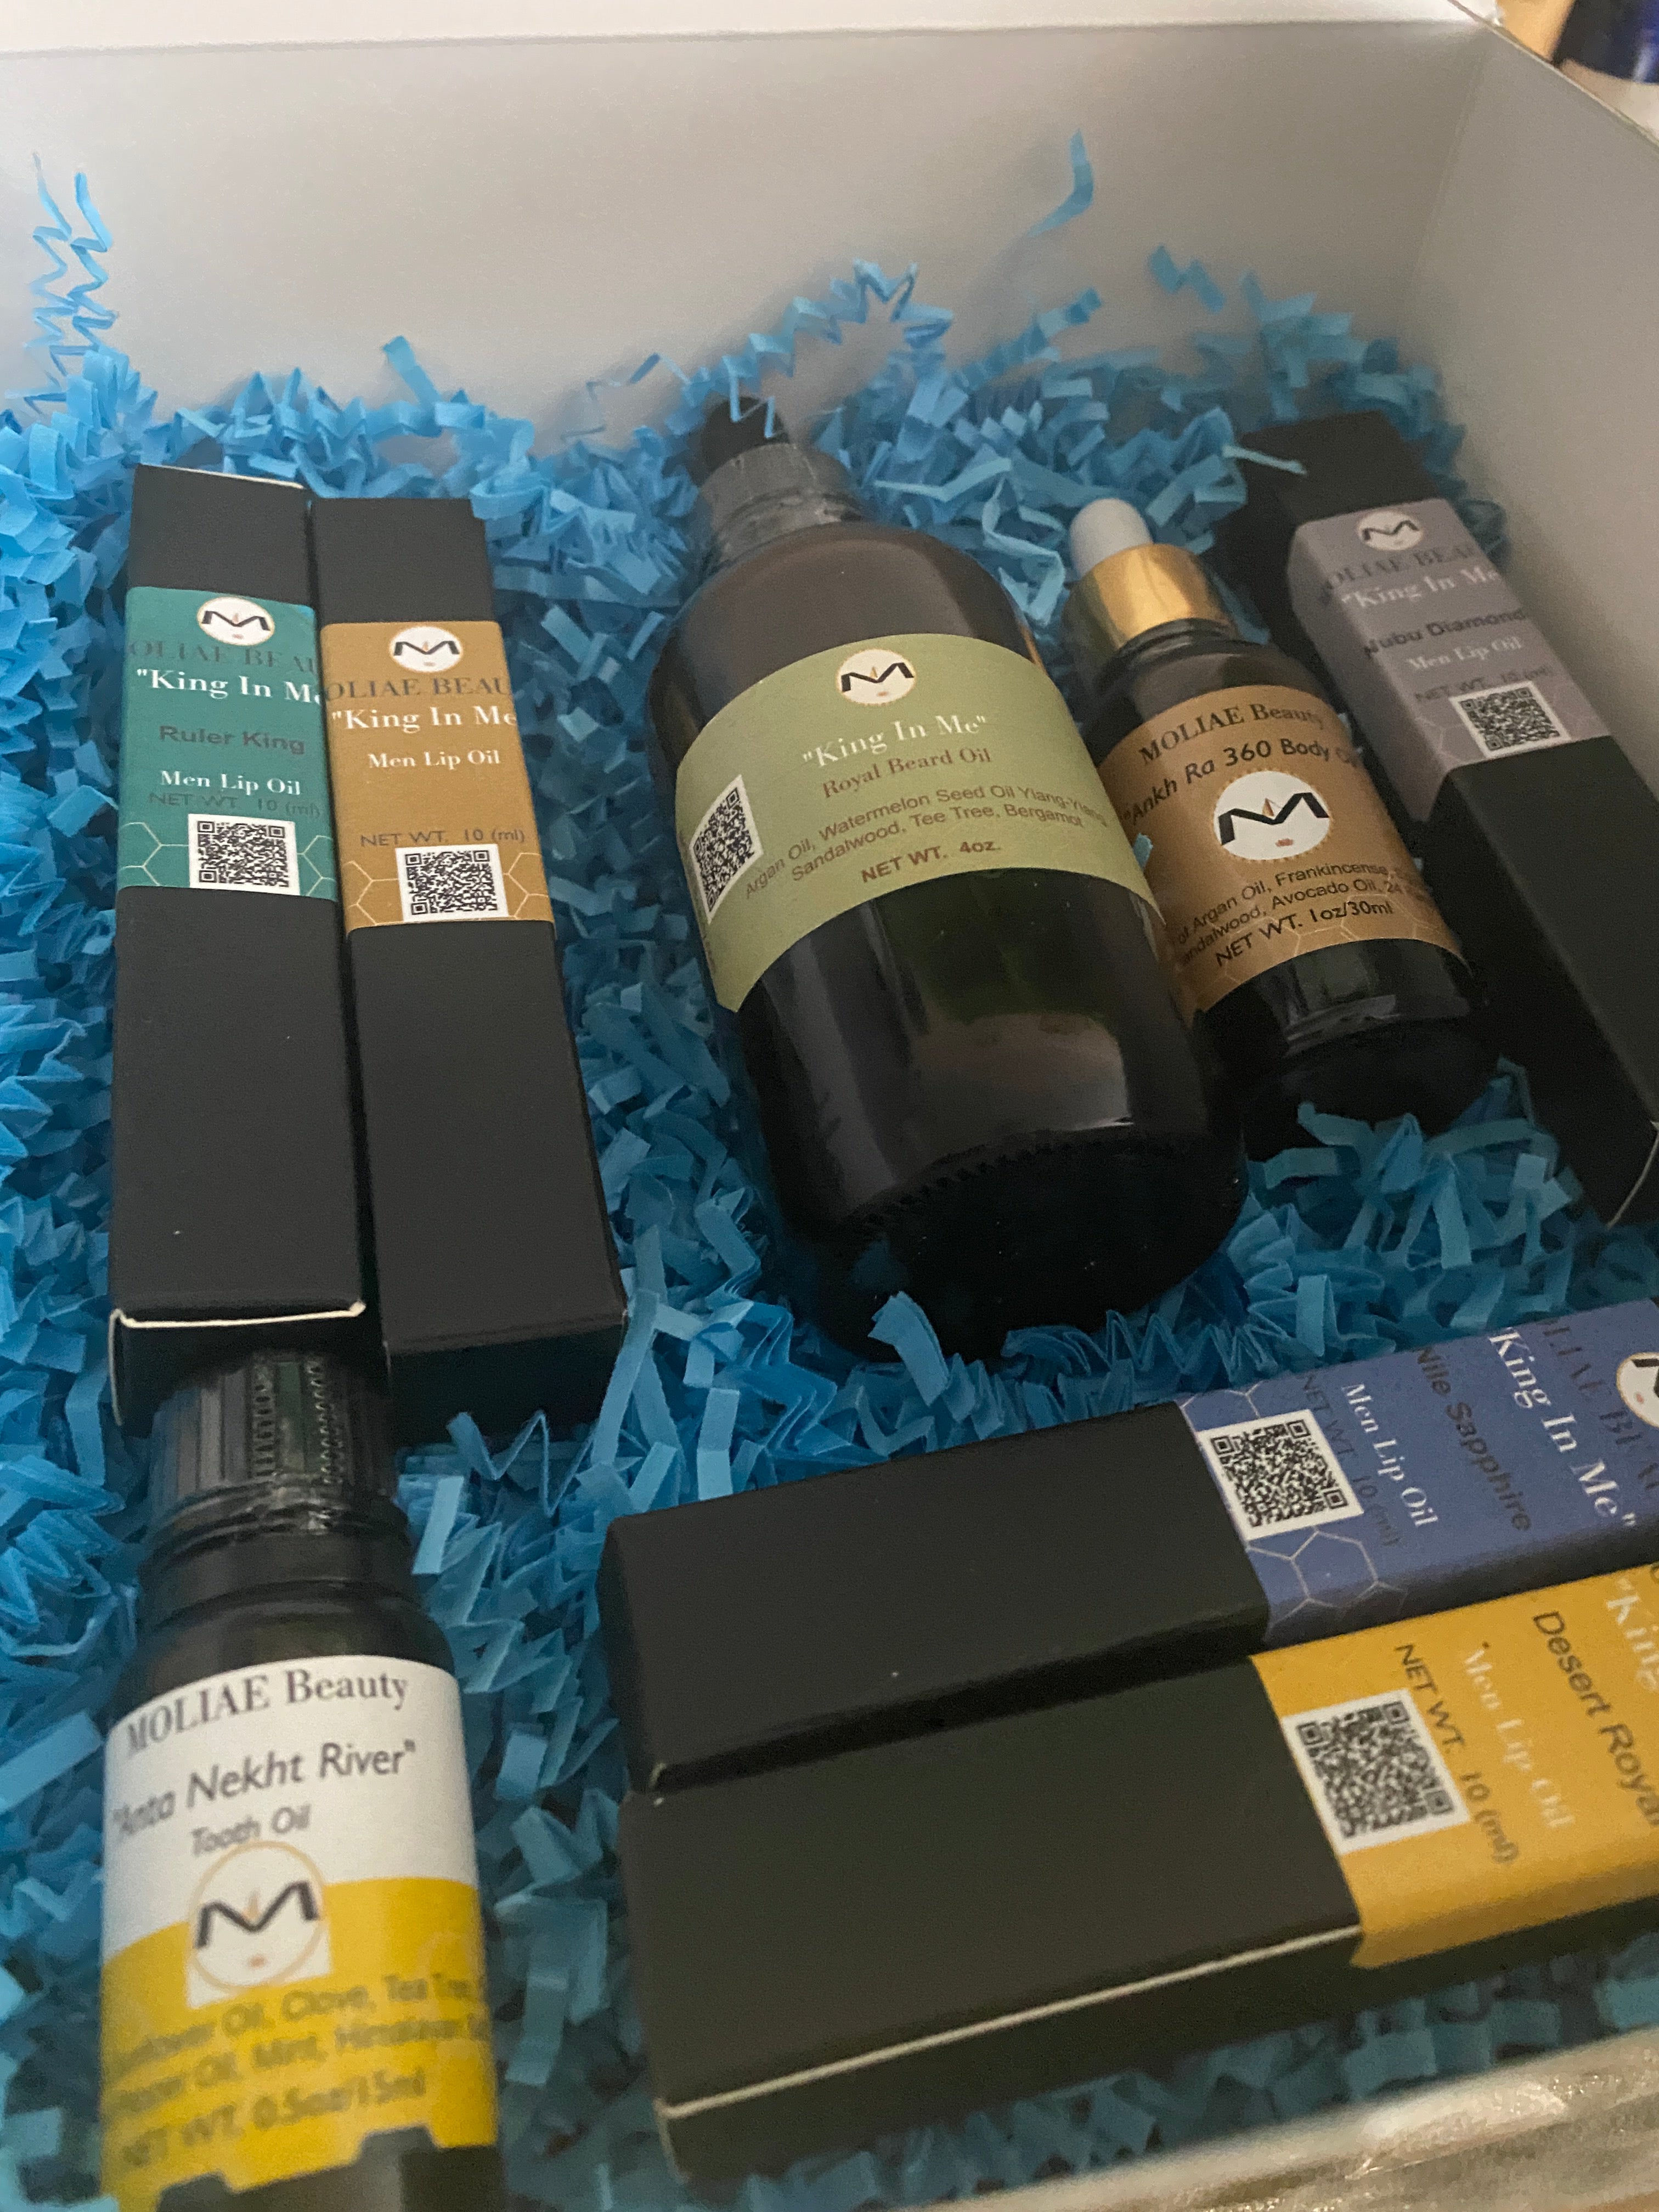 King In Me | Beard Oil with Men Lip Oils Fab 5 | Tooth Oil | Gift Box Kit